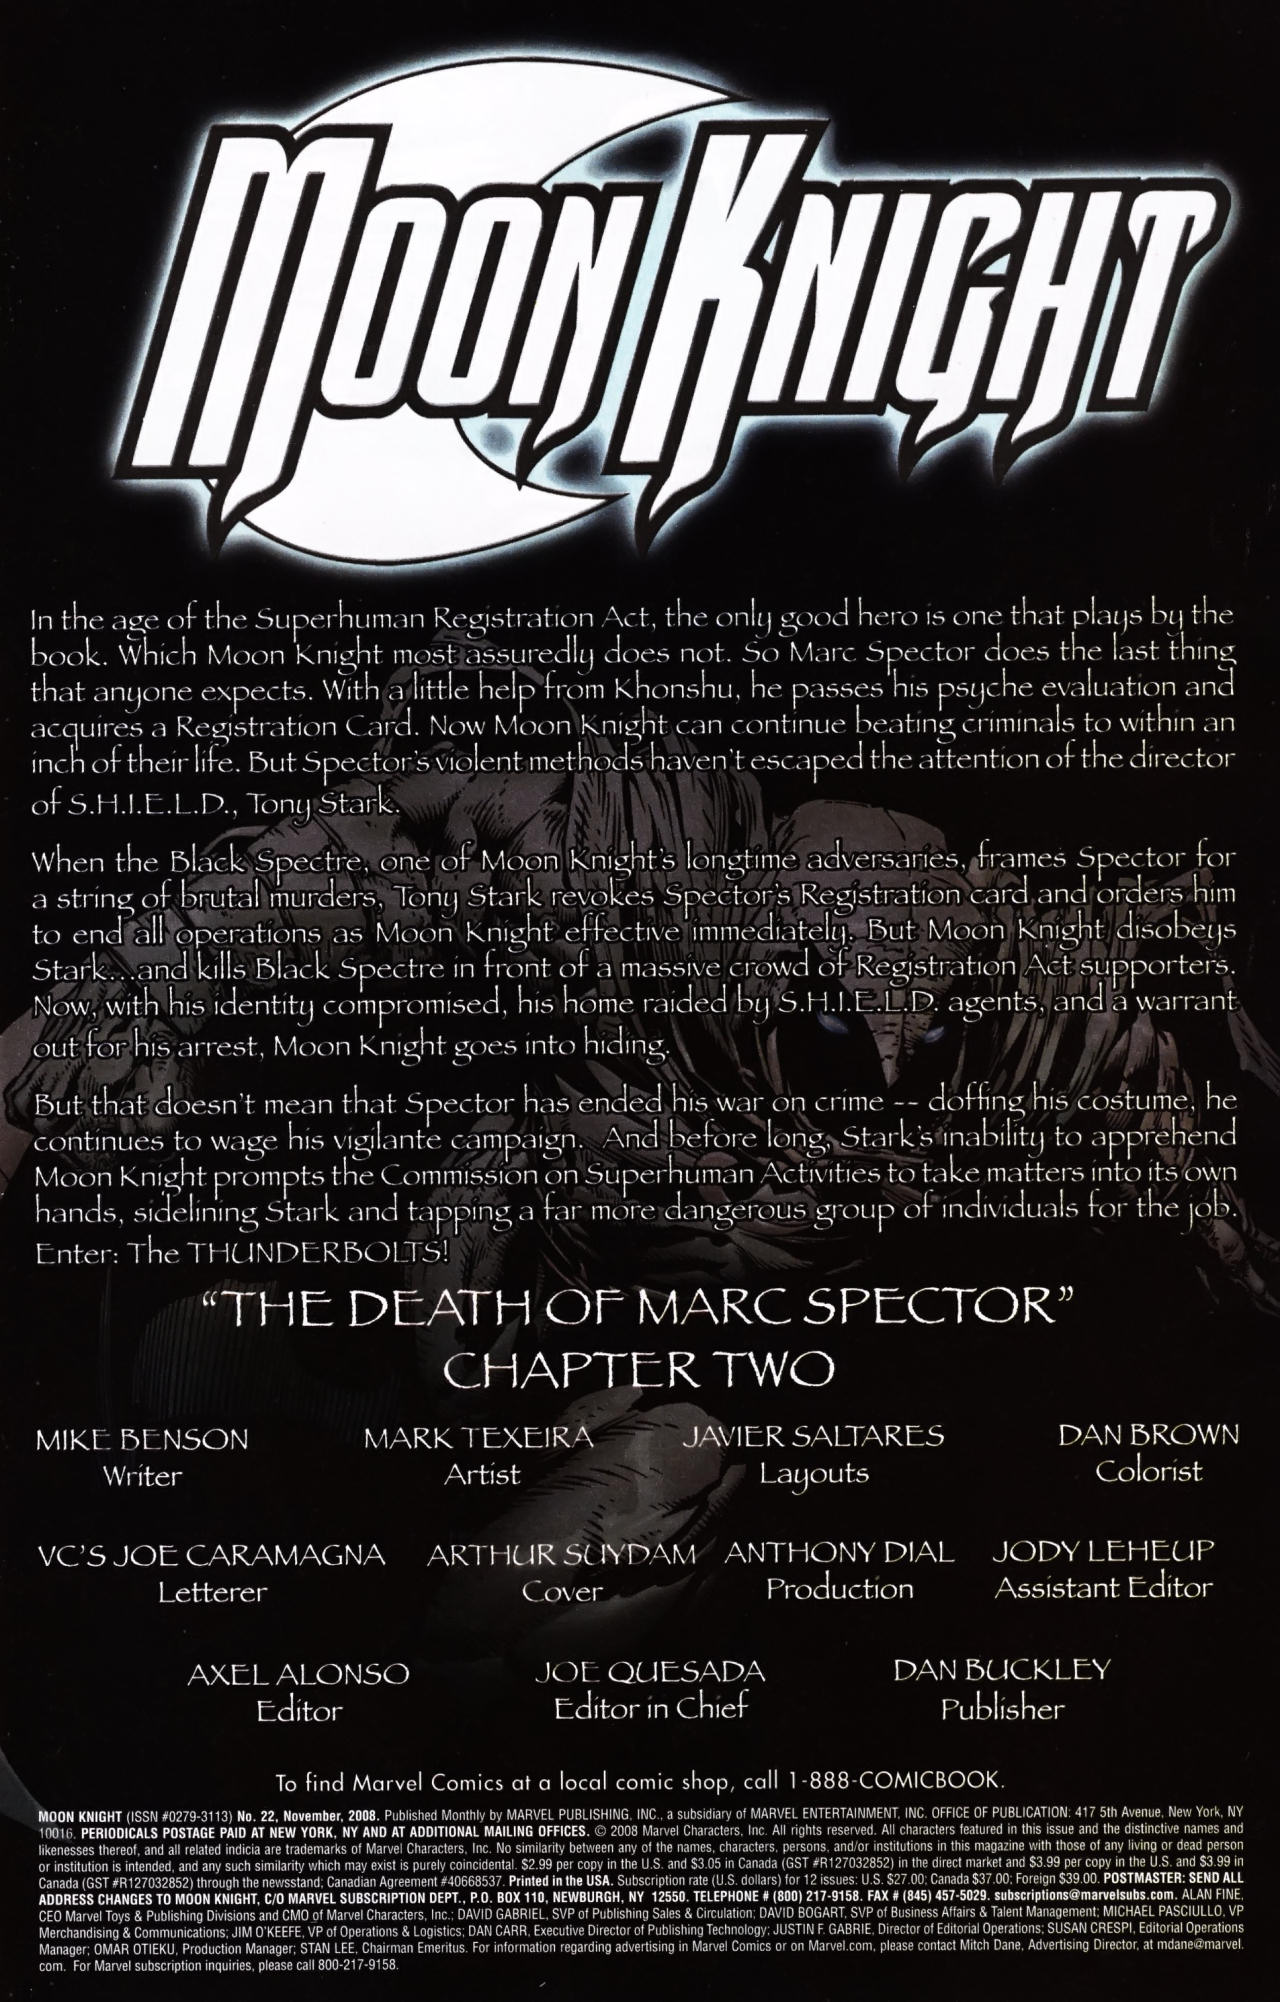 Moon Knight #22 - The Death of Marc Spector, Part 2